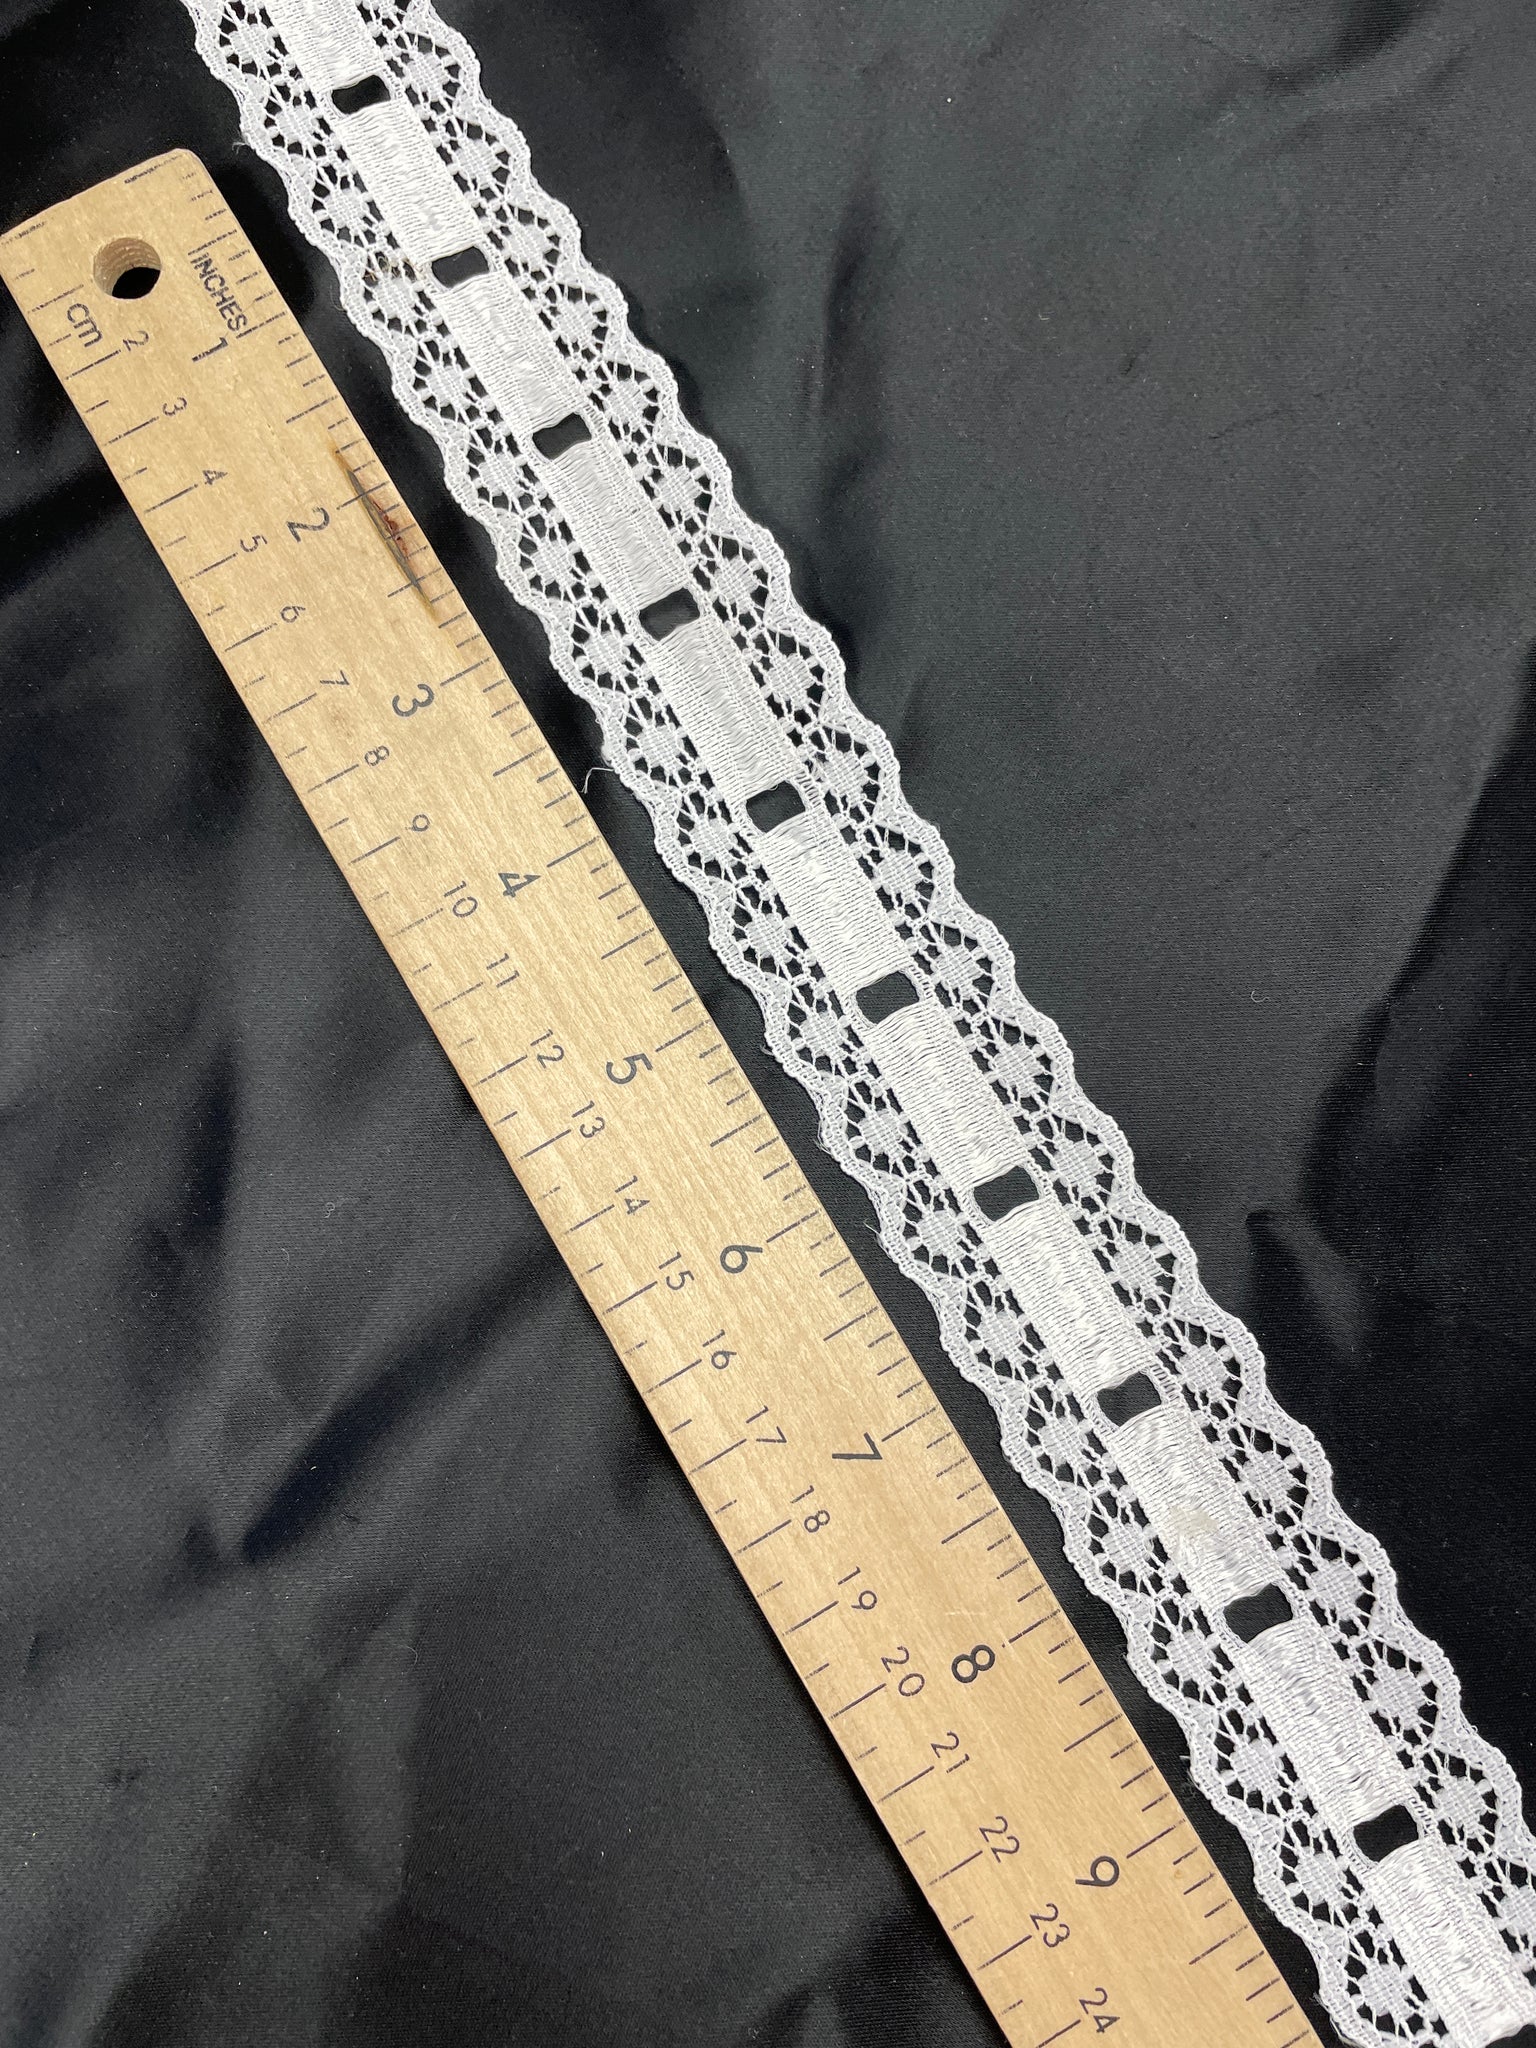 3 YD Polyester Scalloped Beading (Insertion) Lace Trim - White